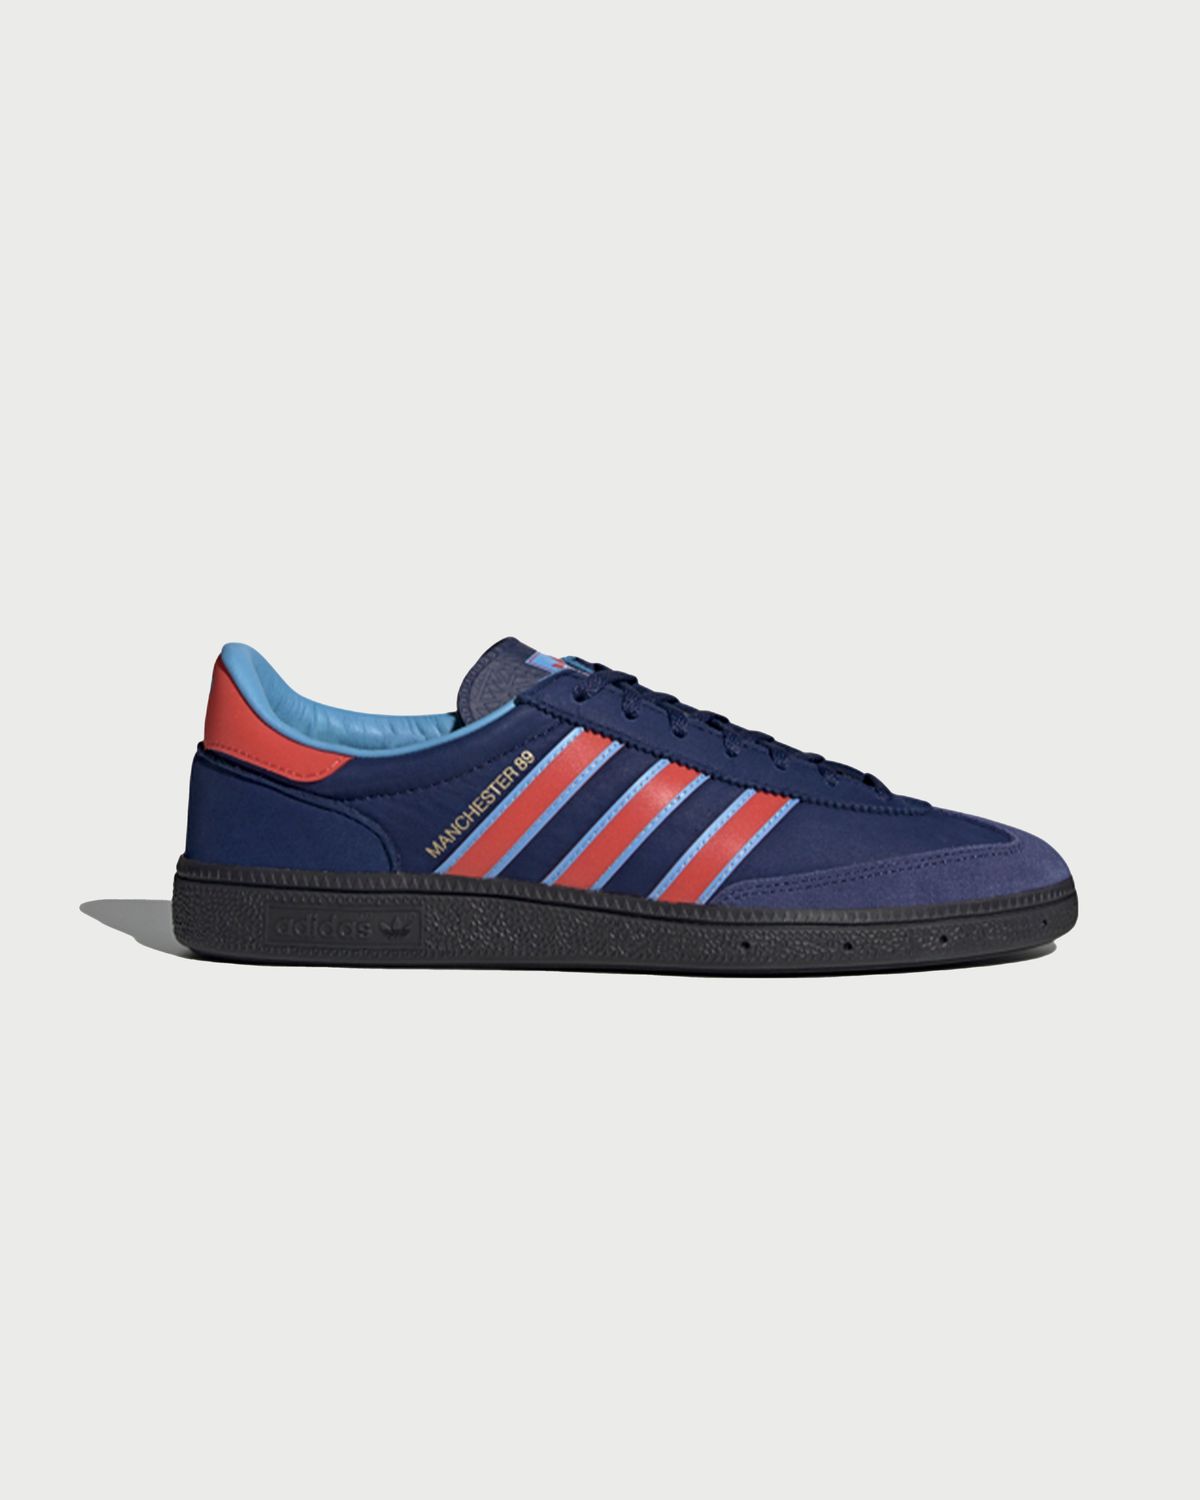 Adidas – Spezial Manchester 89 Trainer Navy - Low Top Sneakers - Blue - Image 1